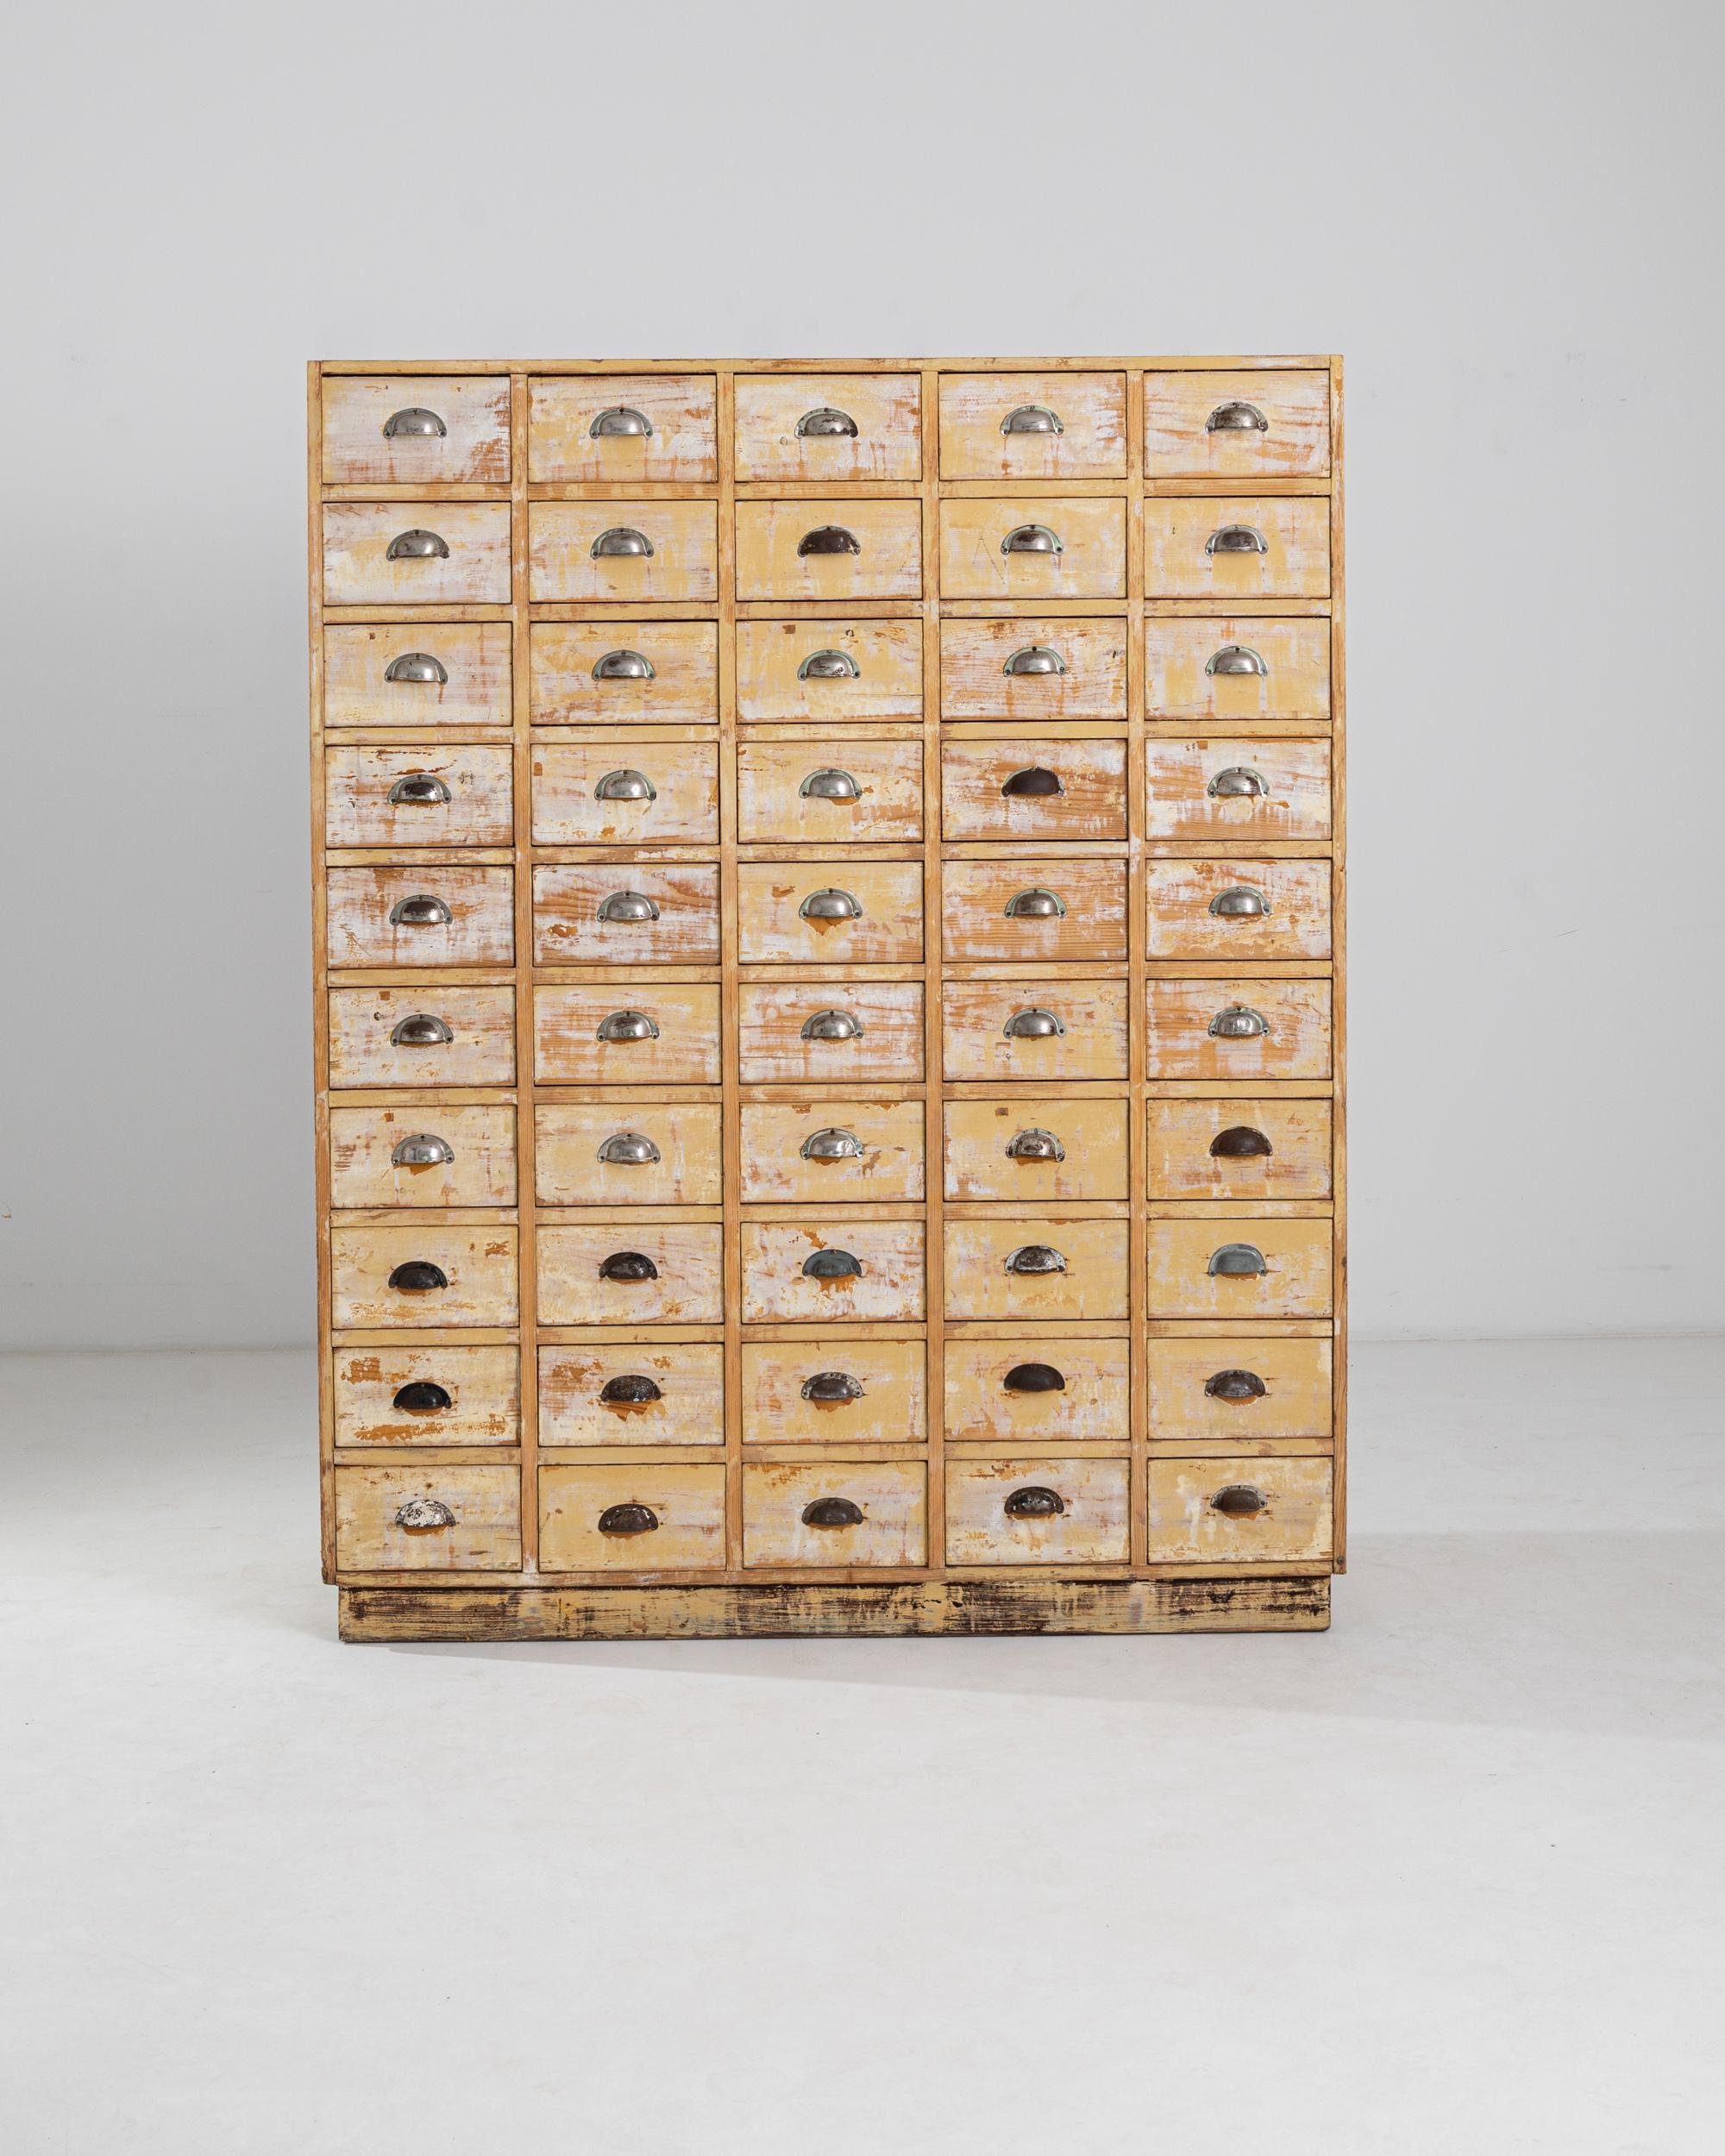 An eye-catching Industrial period piece, this wooden chest of drawers would have originally been used in a workplace for storing files, index cards, or parts. Made in France in the 1930s, the case houses an array of 50 small drawers, arranged in a